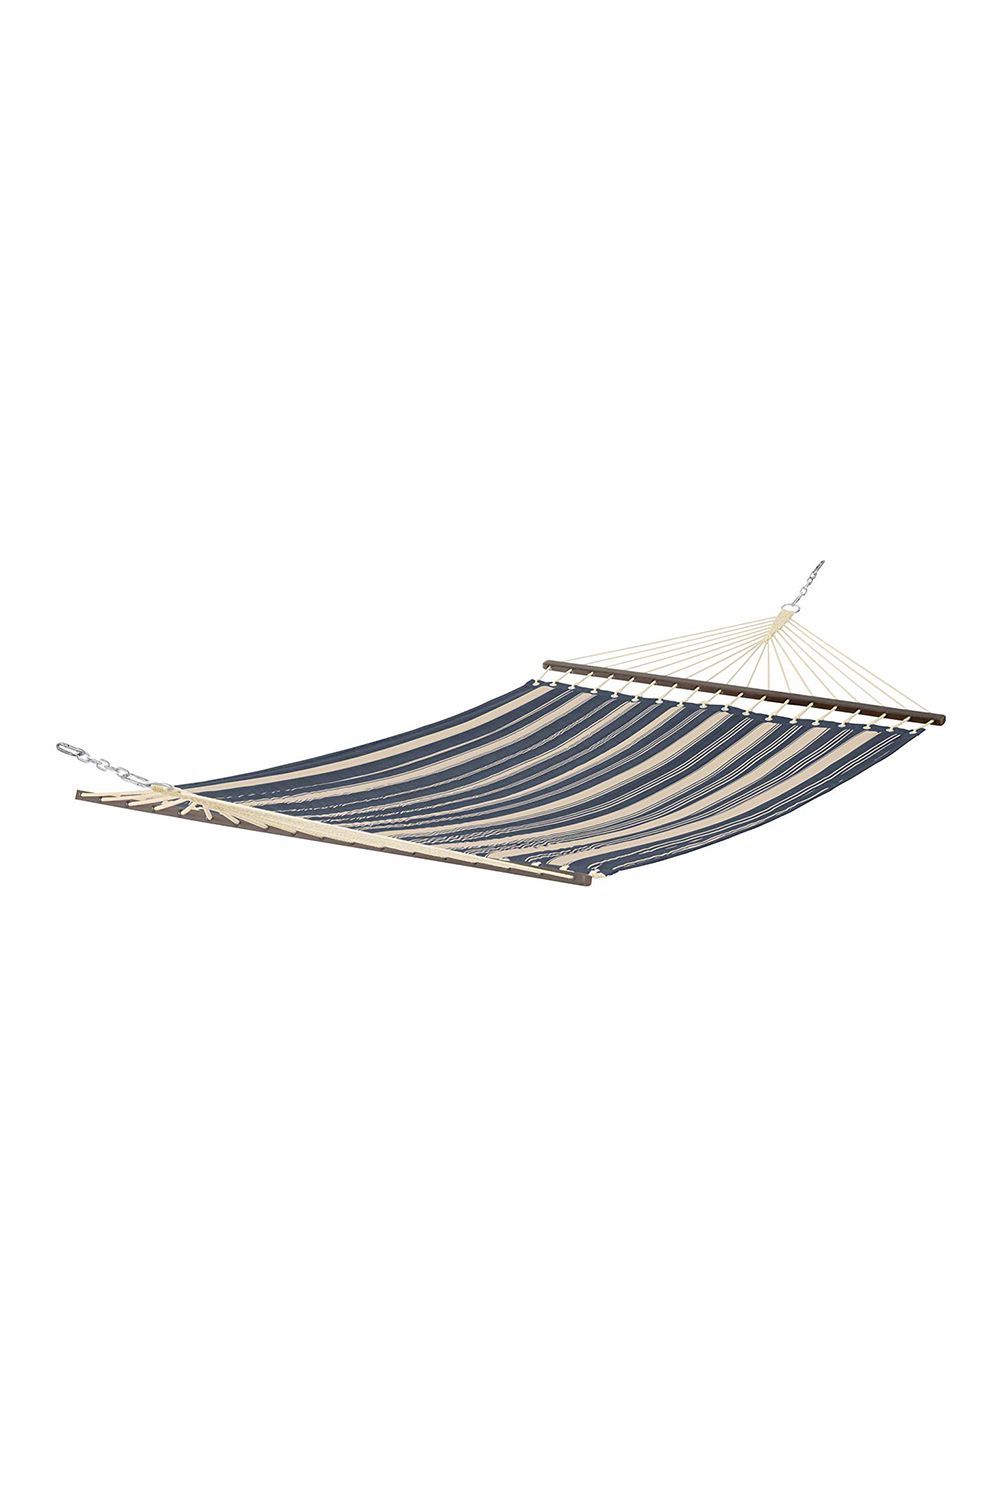 Quilted Double Hammock